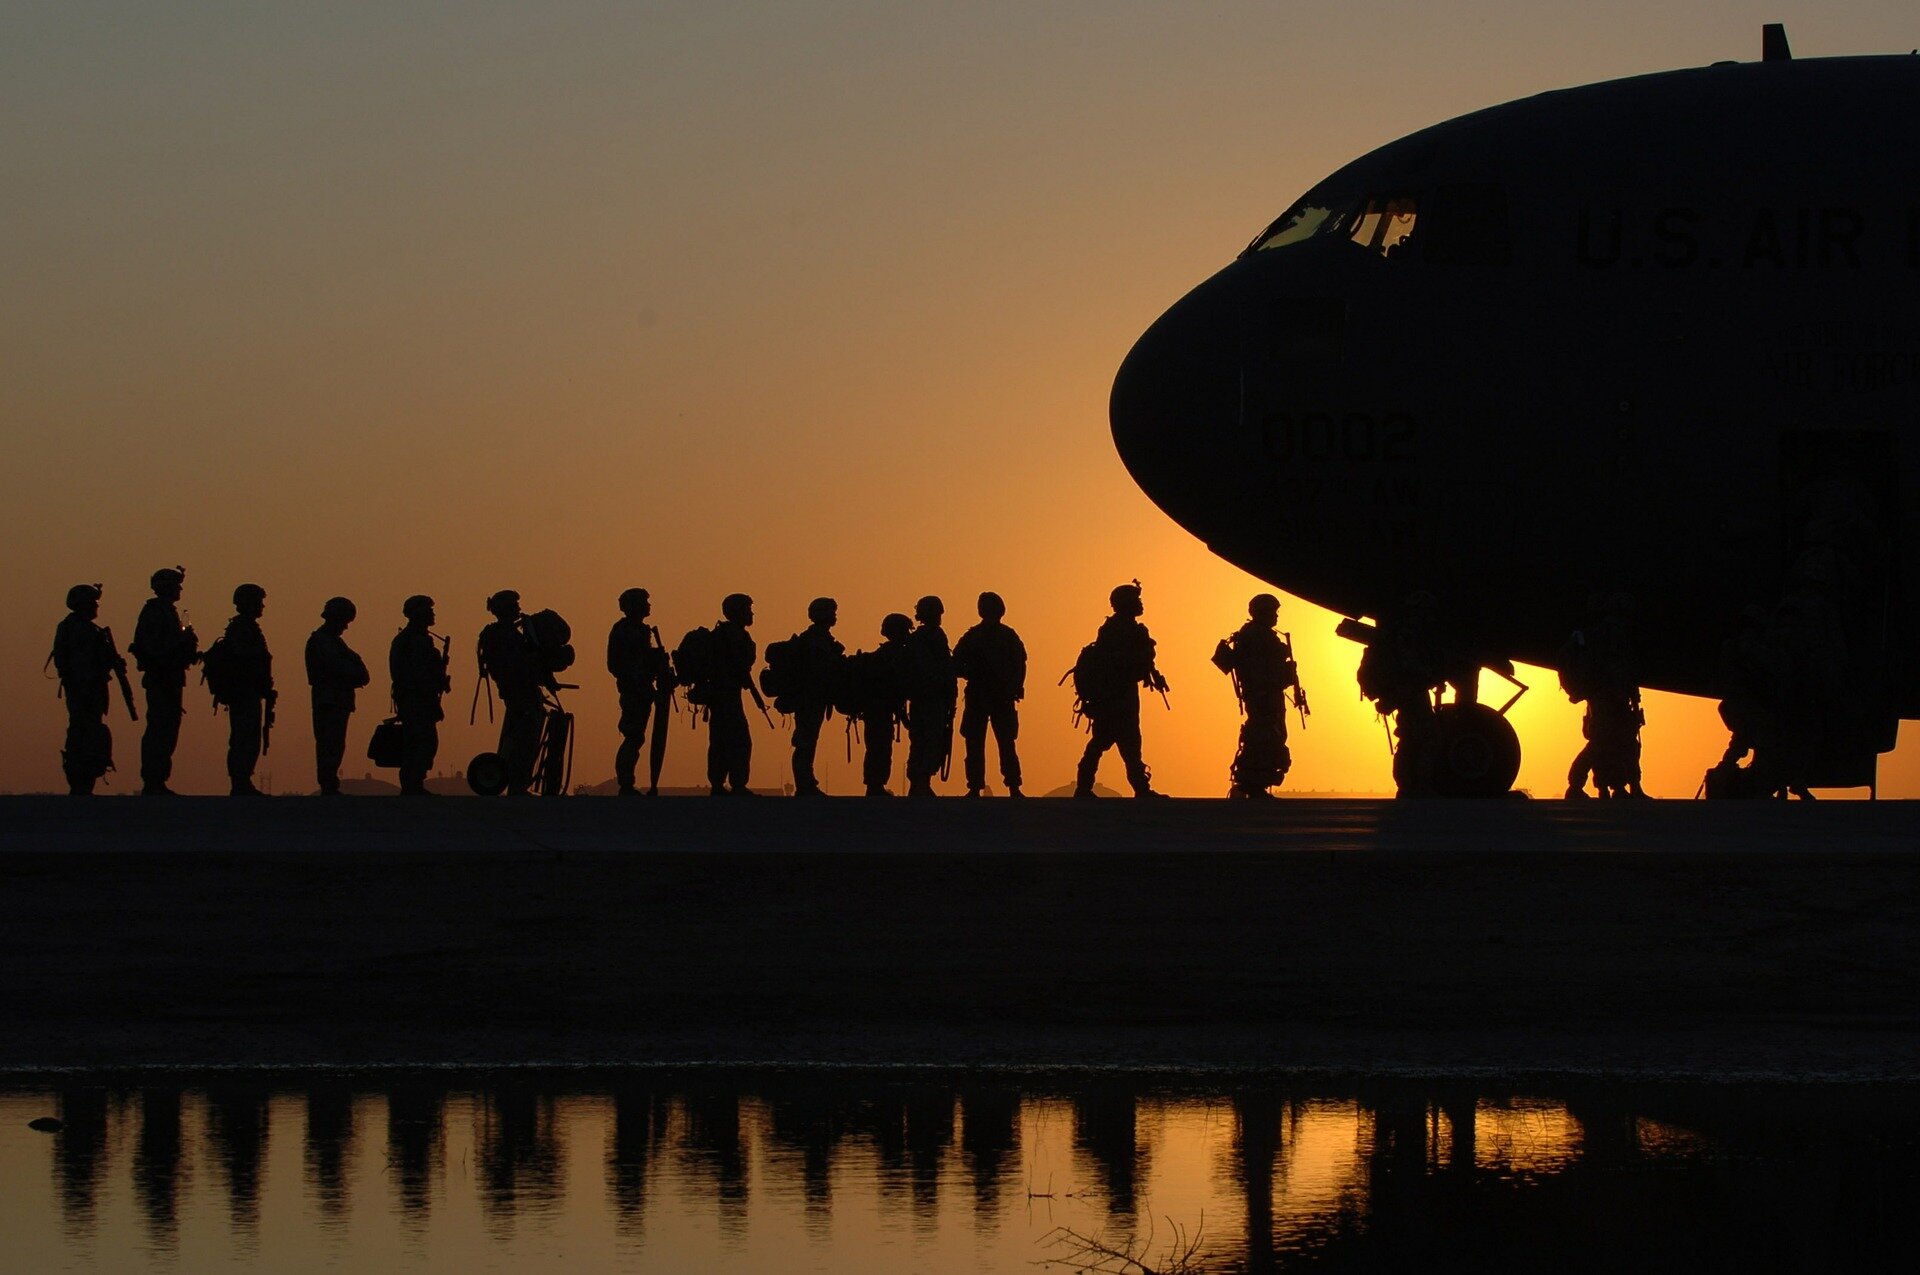 When It Comes to Military Intervention, Americans Prefer to ‘Give Peace a Chance’